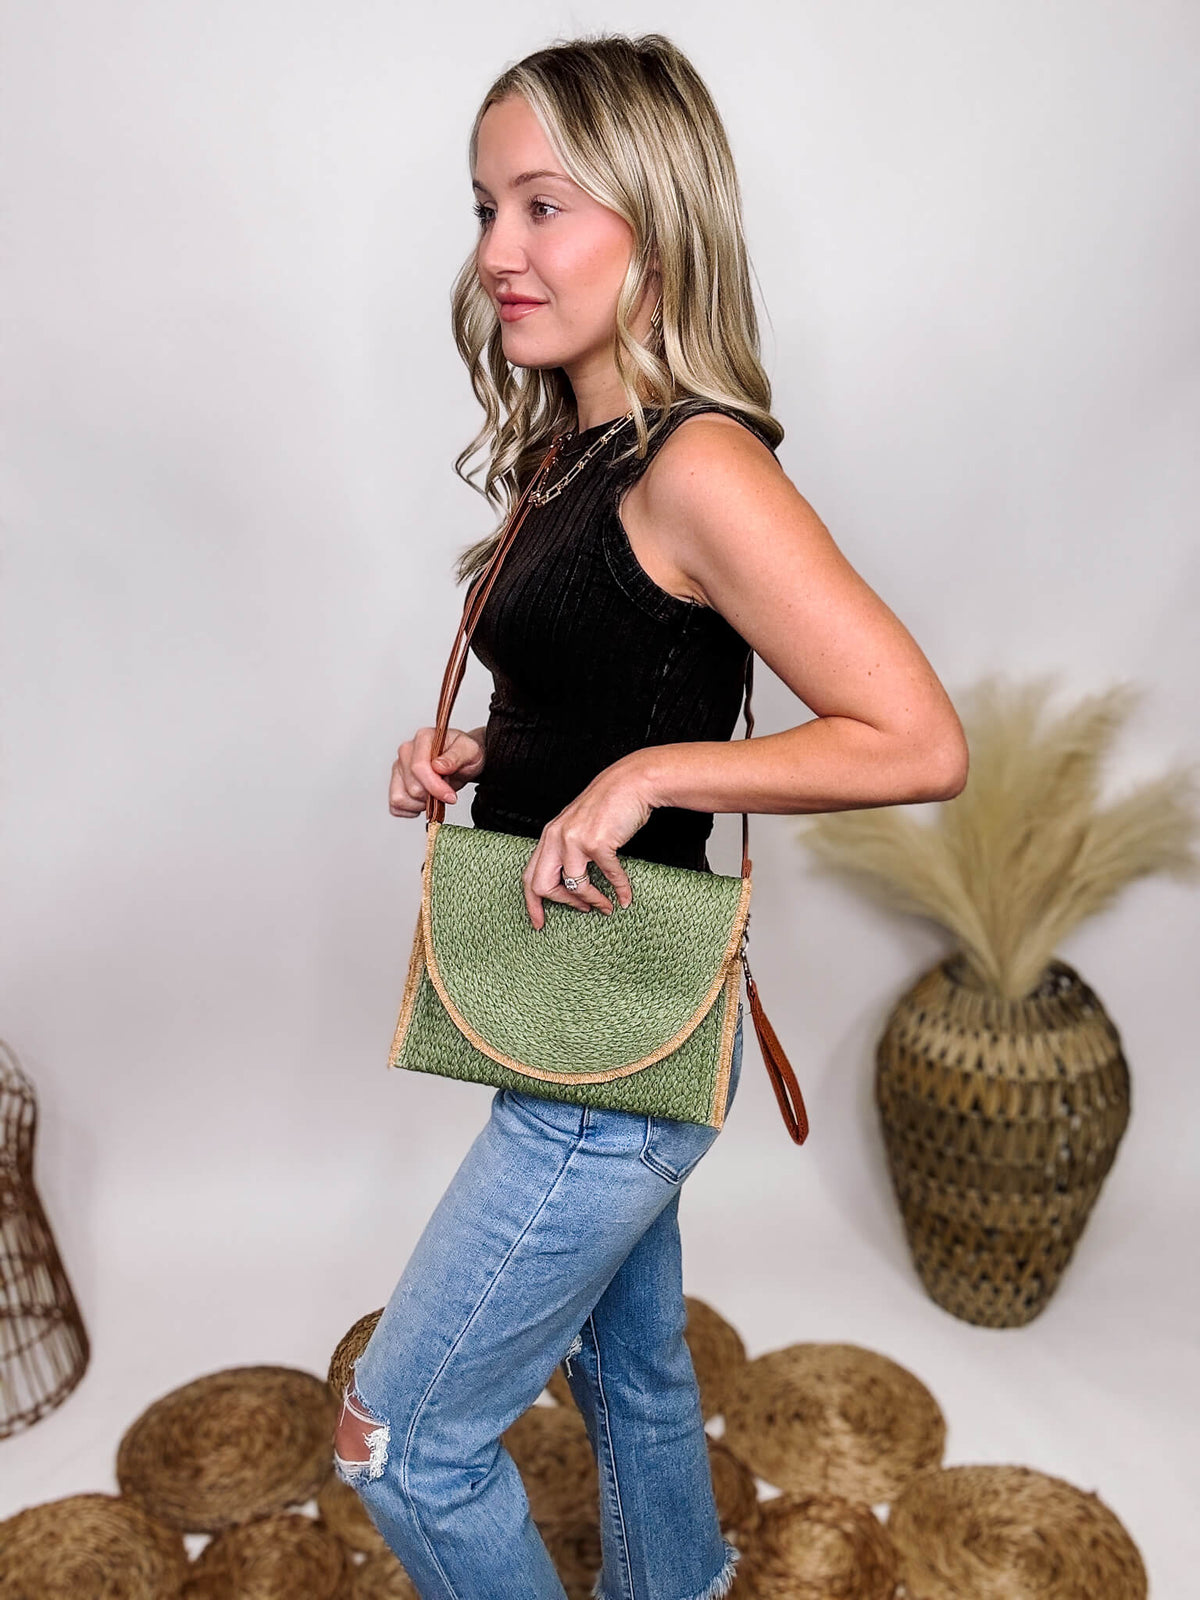 Frayed Hem Straw Crossbody Clutch Bag in Olive Magnetic Closure Removable Wristlet & Cross Body Straps Body Approximately 11"W X 8.5" T Strap Drop 14-26" L